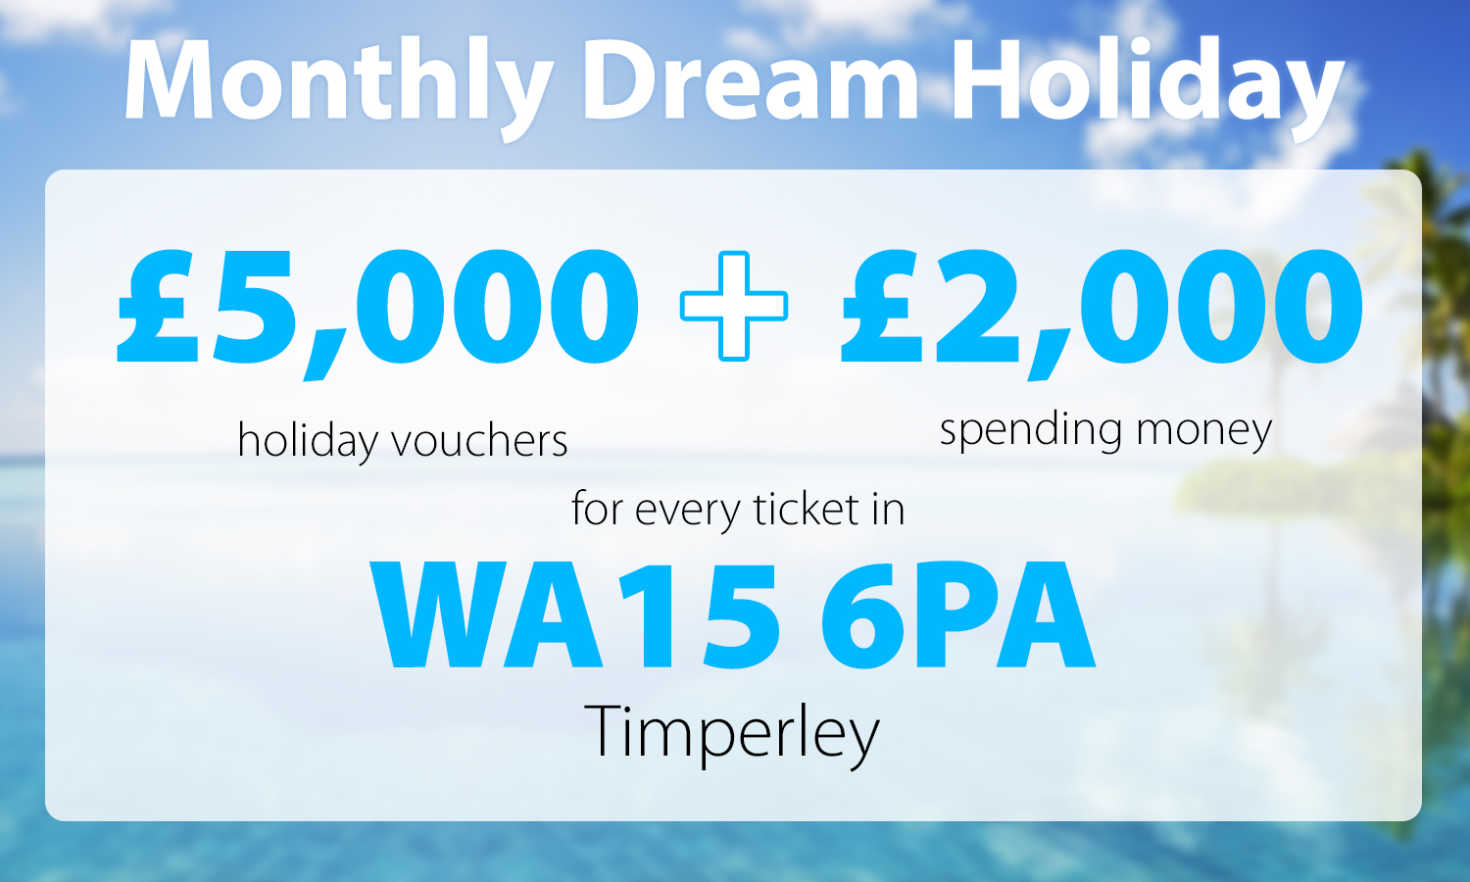 December's Dream Holiday prize landed in postcode WA15 6PA in Timperley